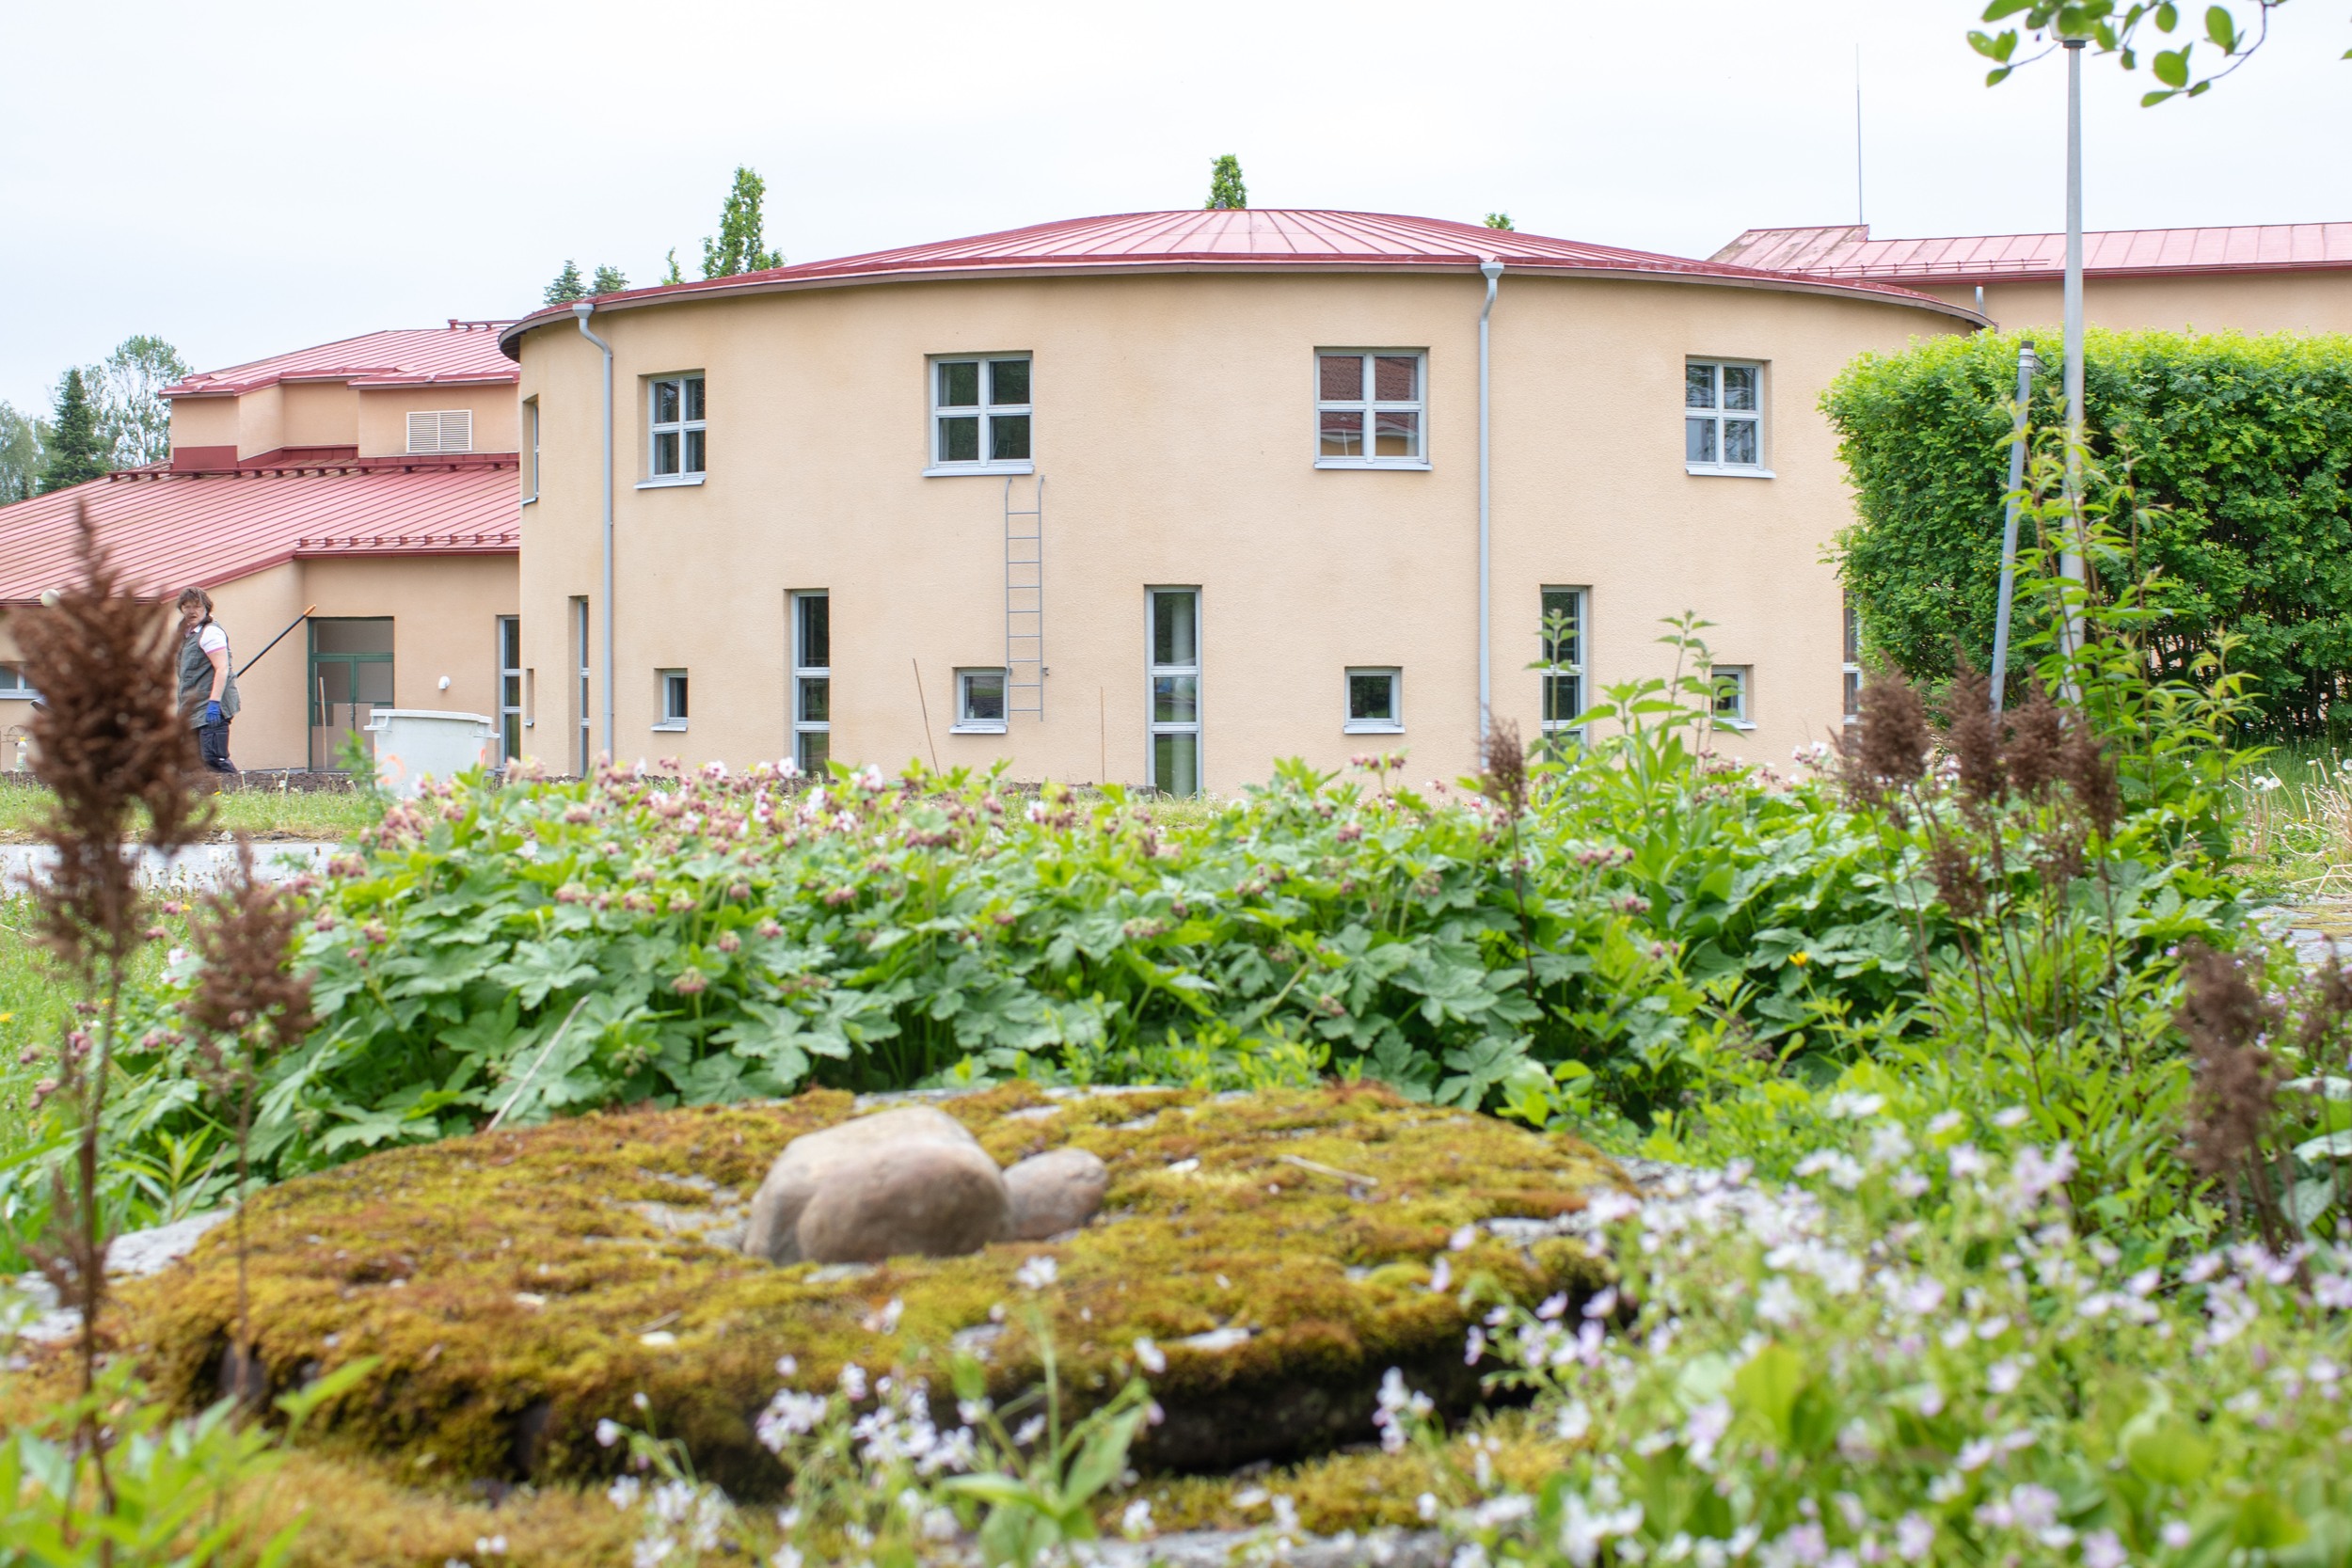 The main building of the Lepaa campus. The building is light cream-coloured and round. Green plantings in the foreground. 